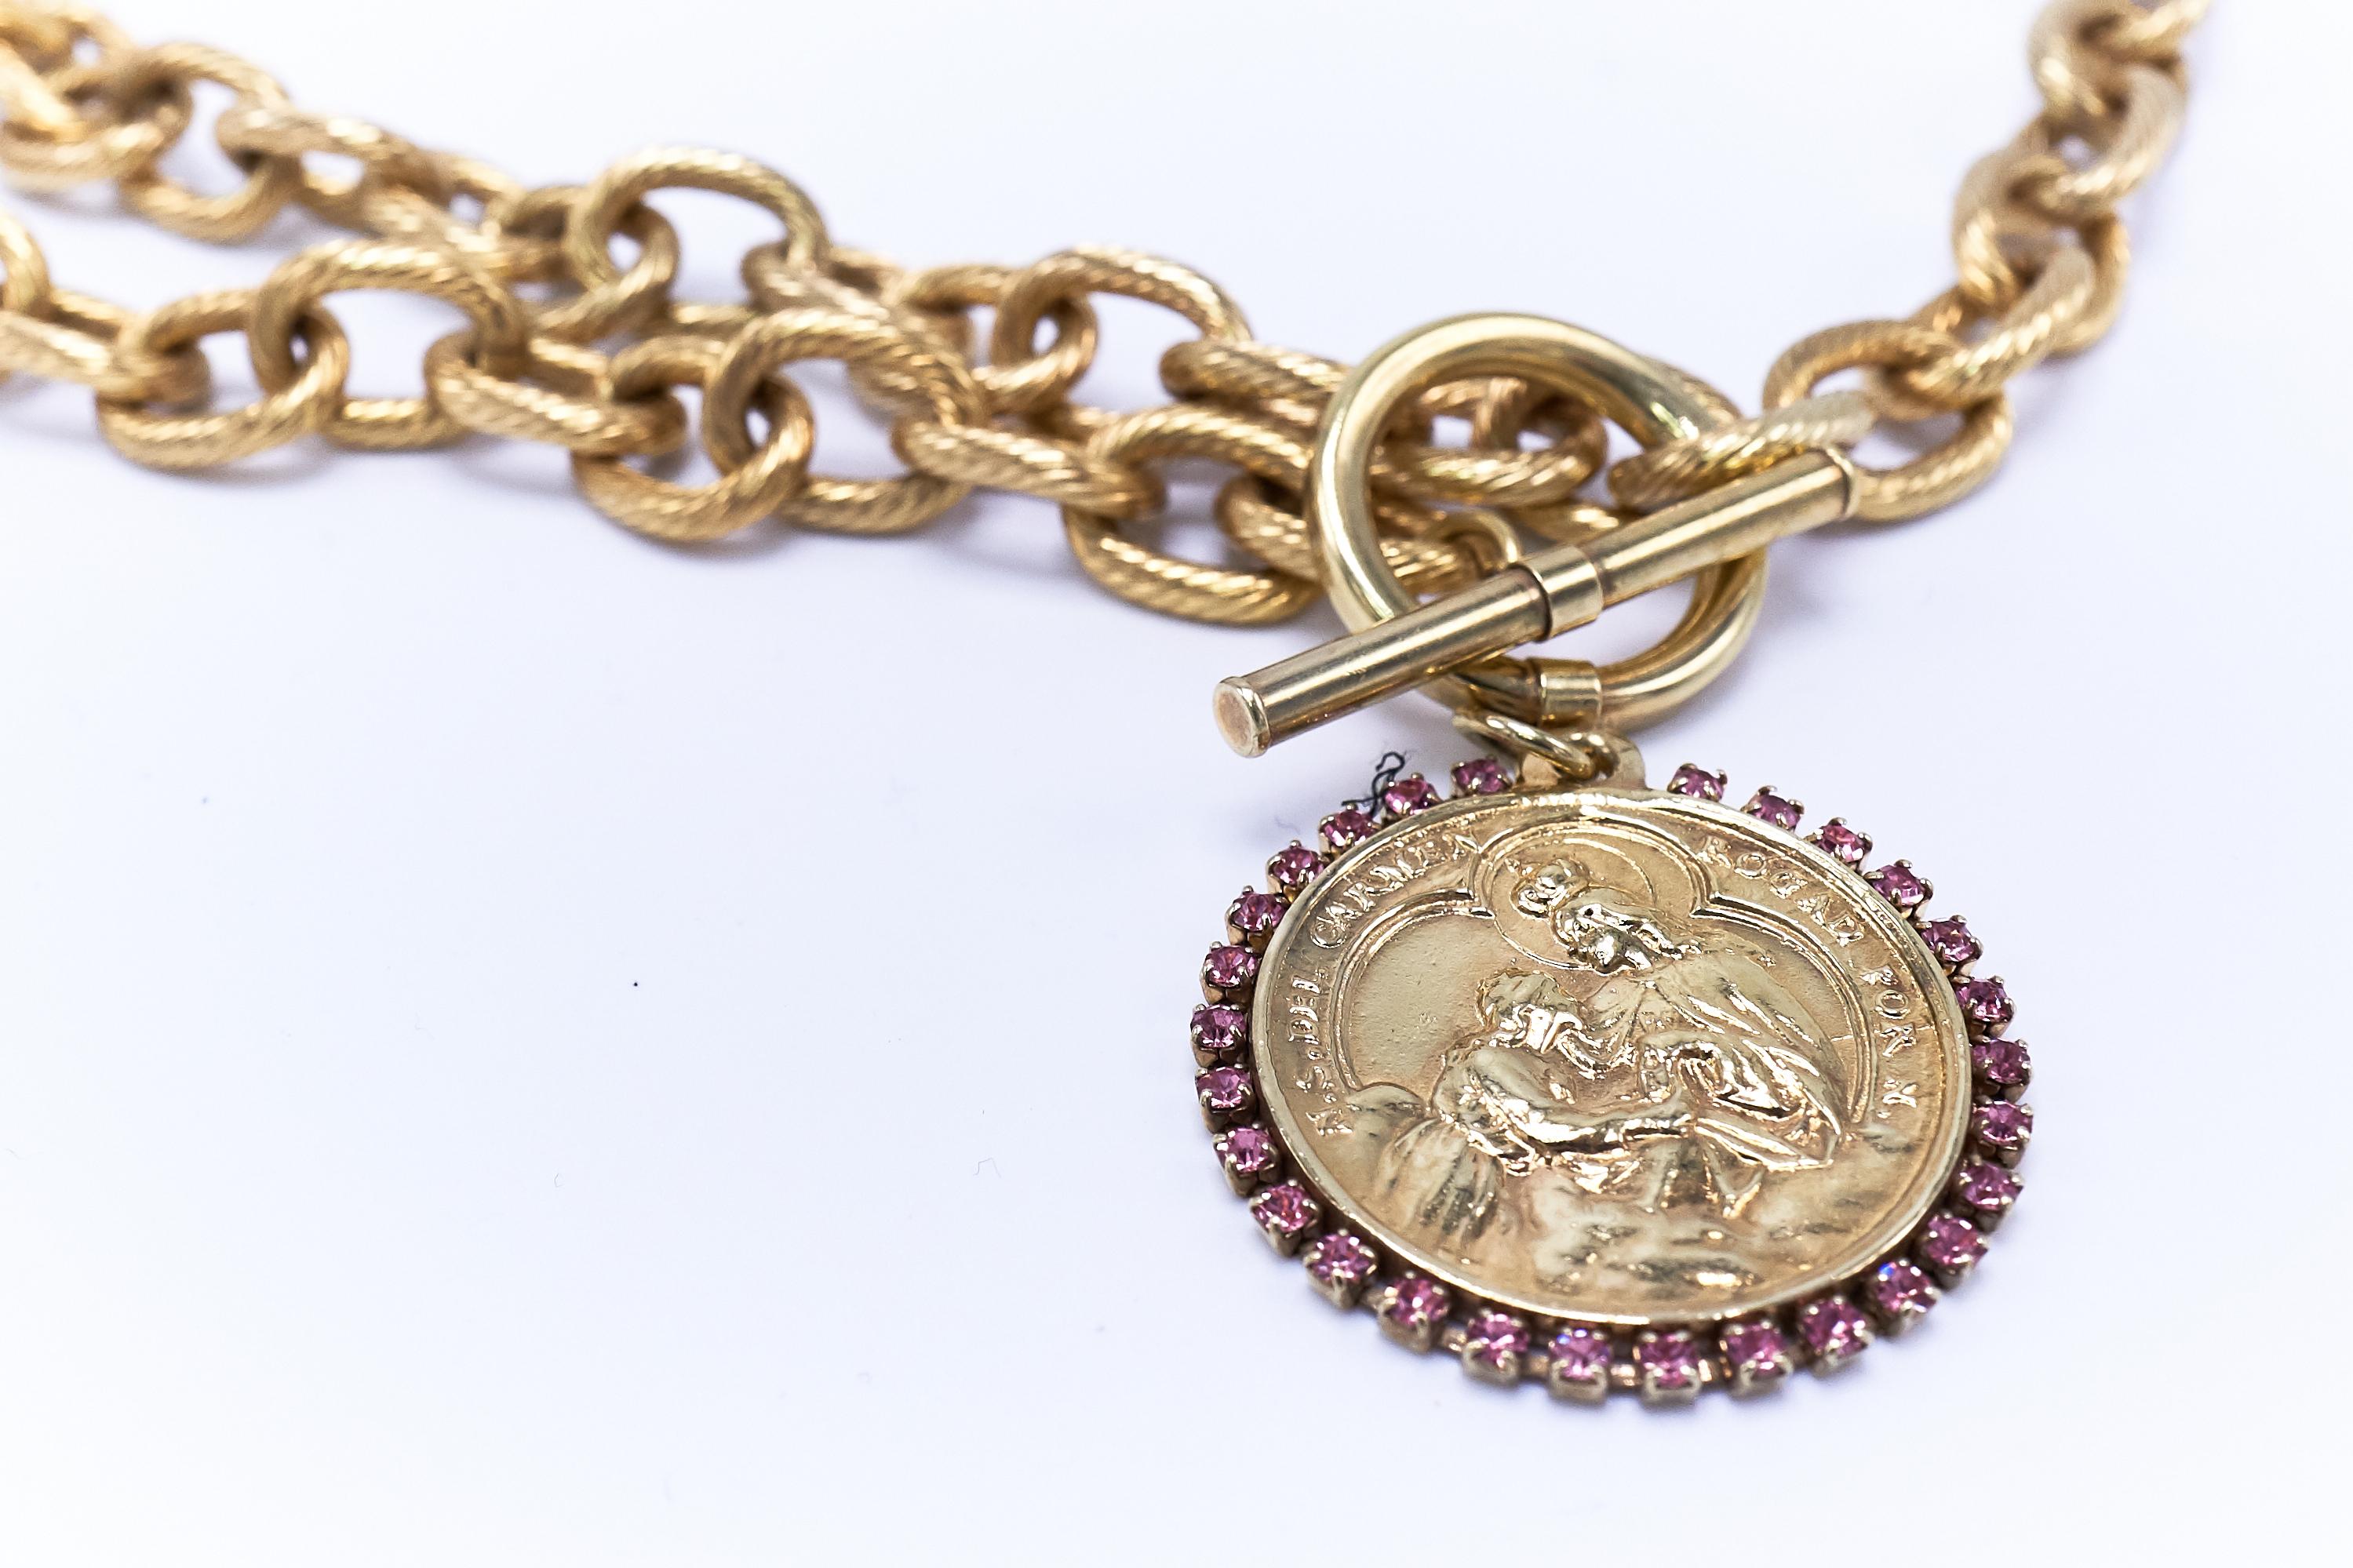 Medal Choker Chain Necklace Virgin Mary Pink Rhinestone J Dauphin

J DAUPHIN necklace 